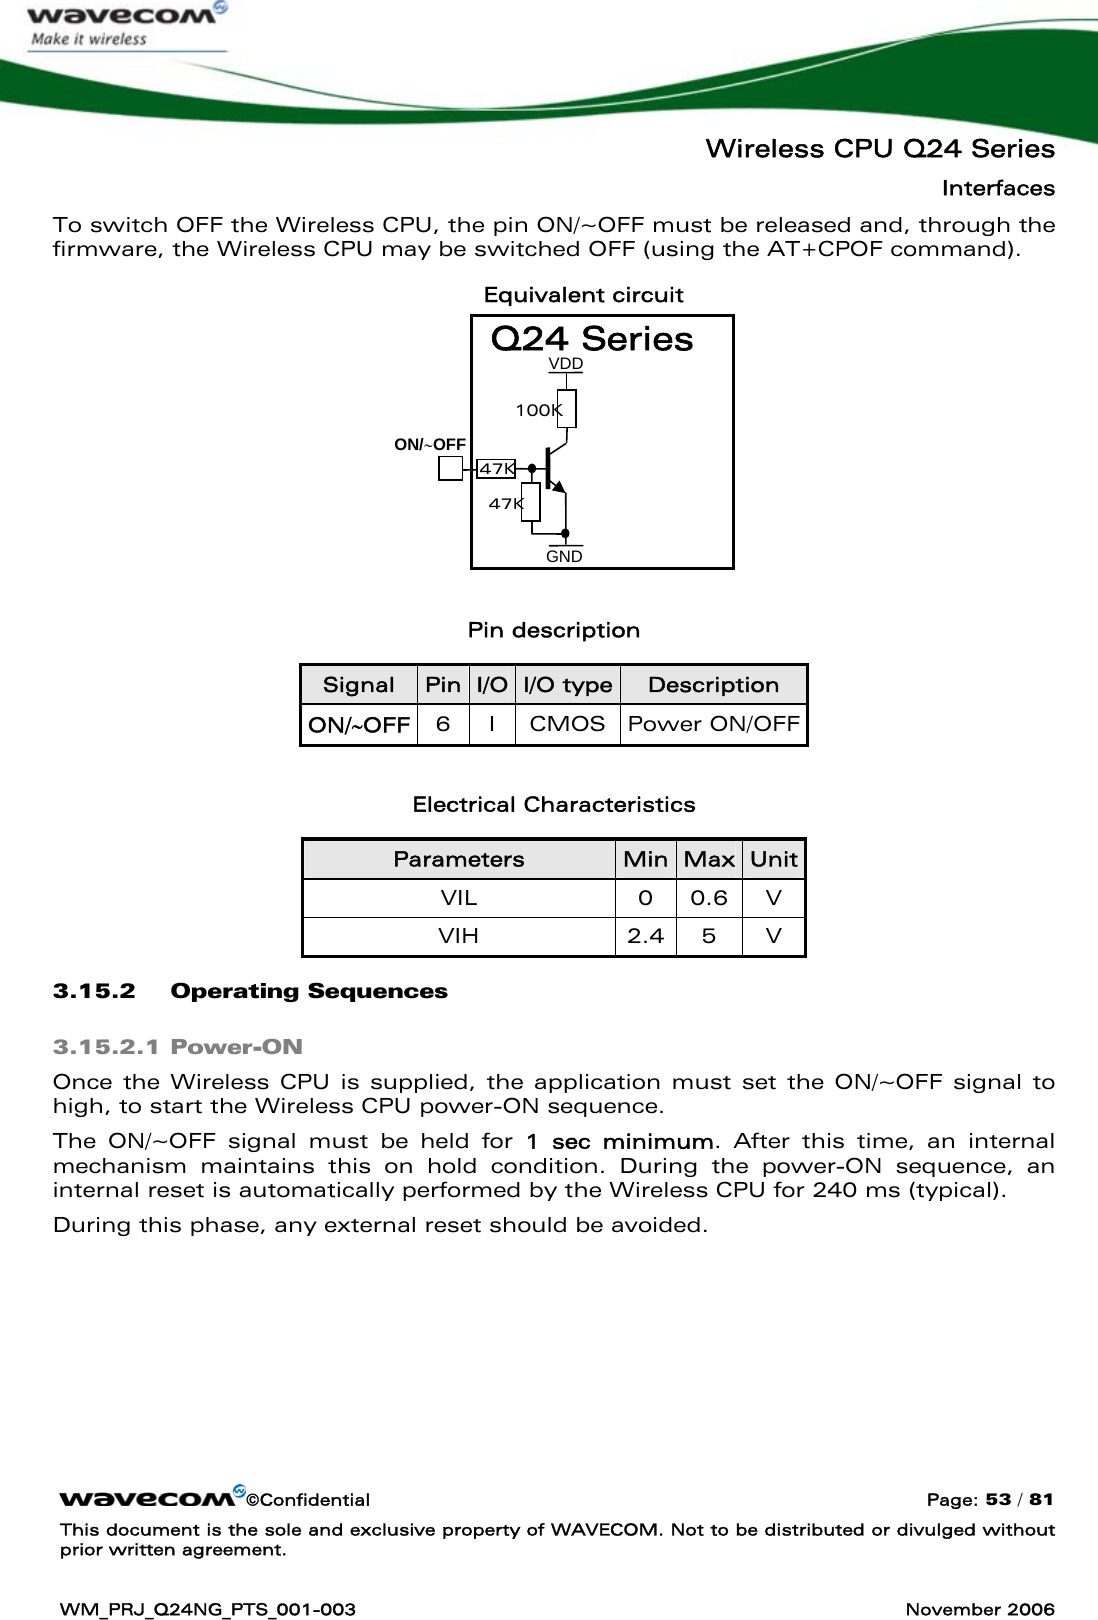   Wireless CPU Q24 Series Interfaces ©Confidential  Page: 53 / 81 This document is the sole and exclusive property of WAVECOM. Not to be distributed or divulged without prior written agreement.  WM_PRJ_Q24NG_PTS_001-003  November 2006  To switch OFF the Wireless CPU, the pin ON/~OFF must be released and, through the firmware, the Wireless CPU may be switched OFF (using the AT+CPOF command). Equivalent circuit         Pin description Signal  Pin I/O I/O type Description ON/∼OFF  6 I CMOS Power ON/OFF  Electrical Characteristics Parameters  Min Max Unit VIL 0 0.6 V VIH 2.4 5 V 3.15.2 Operating Sequences 3.15.2.1 Power-ON Once the Wireless CPU is supplied, the application must set the ON/~OFF signal to high, to start the Wireless CPU power-ON sequence. The ON/~OFF signal must be held for 1 sec minimum. After this time, an internal mechanism maintains this on hold condition. During the power-ON sequence, an internal reset is automatically performed by the Wireless CPU for 240 ms (typical). During this phase, any external reset should be avoided. GND ON/∼OFF47K 100K 47K VDD Q24 Series 